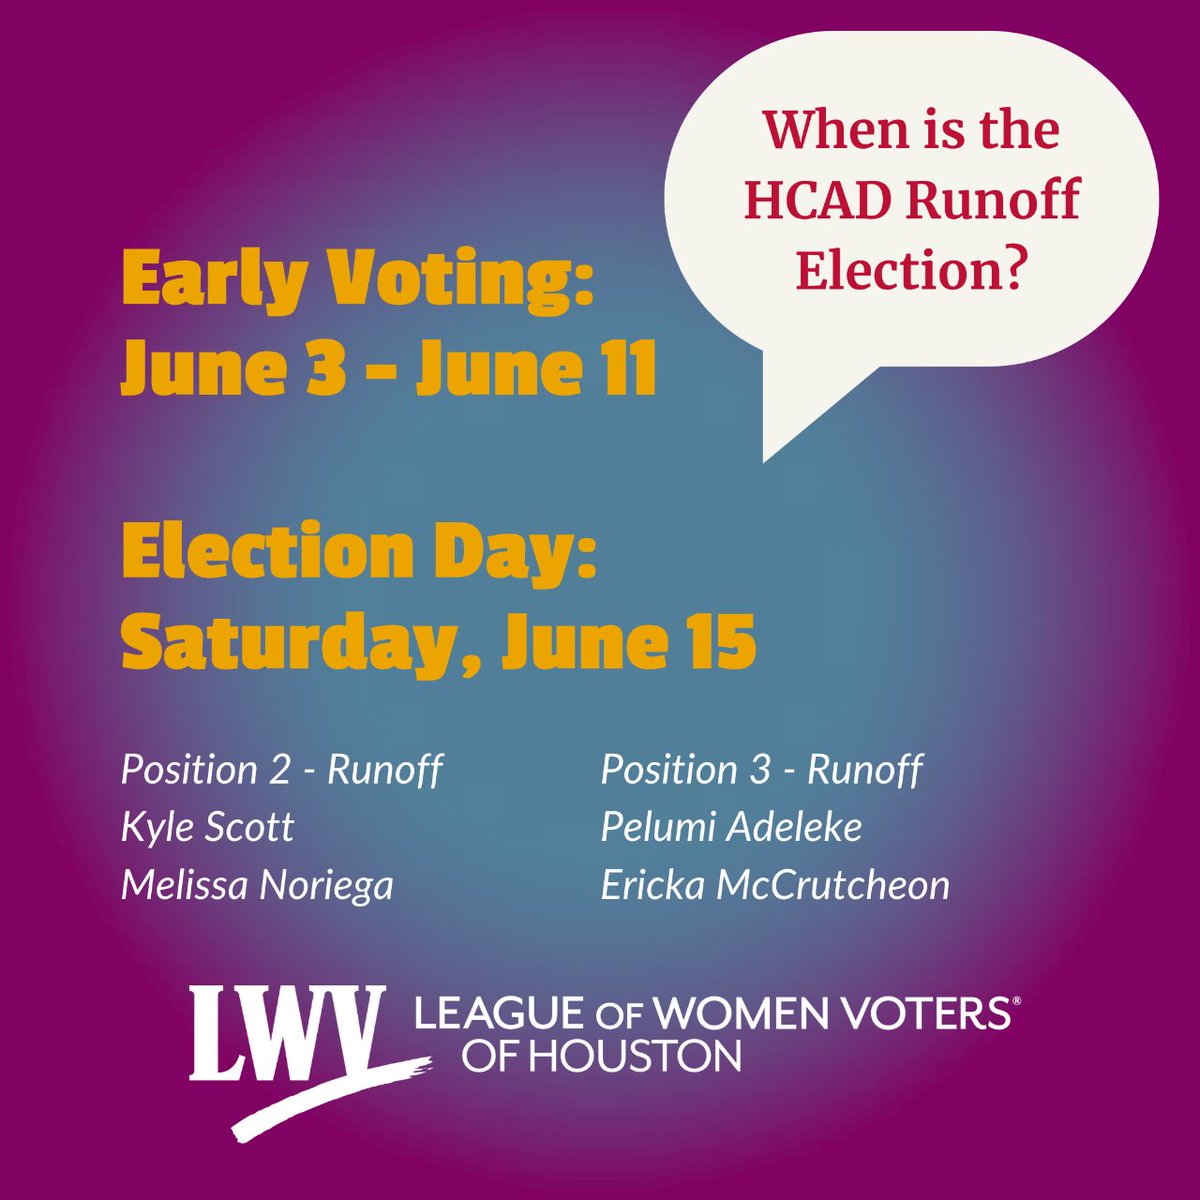 Mark your calendars! If you missed the first HCAD election, you have a chance to vote in the runoff! #lwvhouston #houstonvoter #harrisvotes #yourvotematters